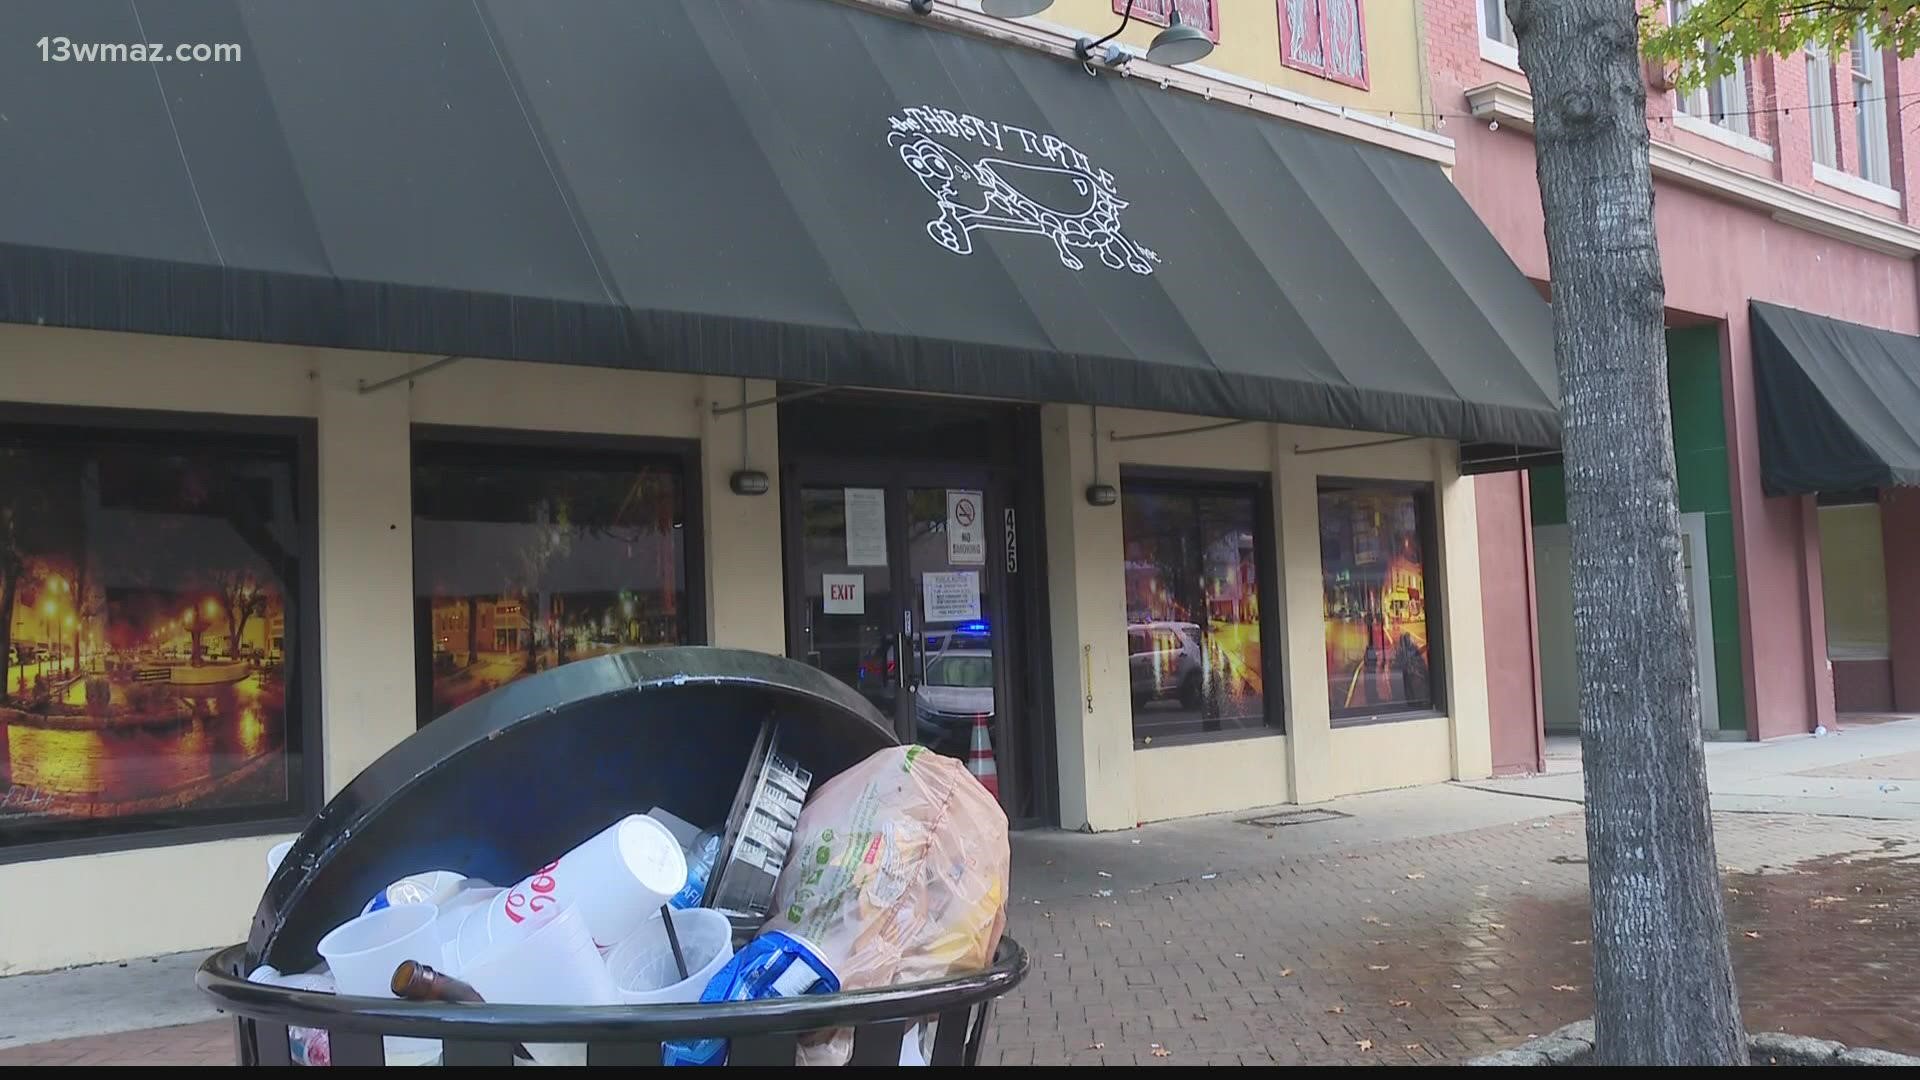 Two deadly shootings have happened near the downtown Macon bar in the last year.